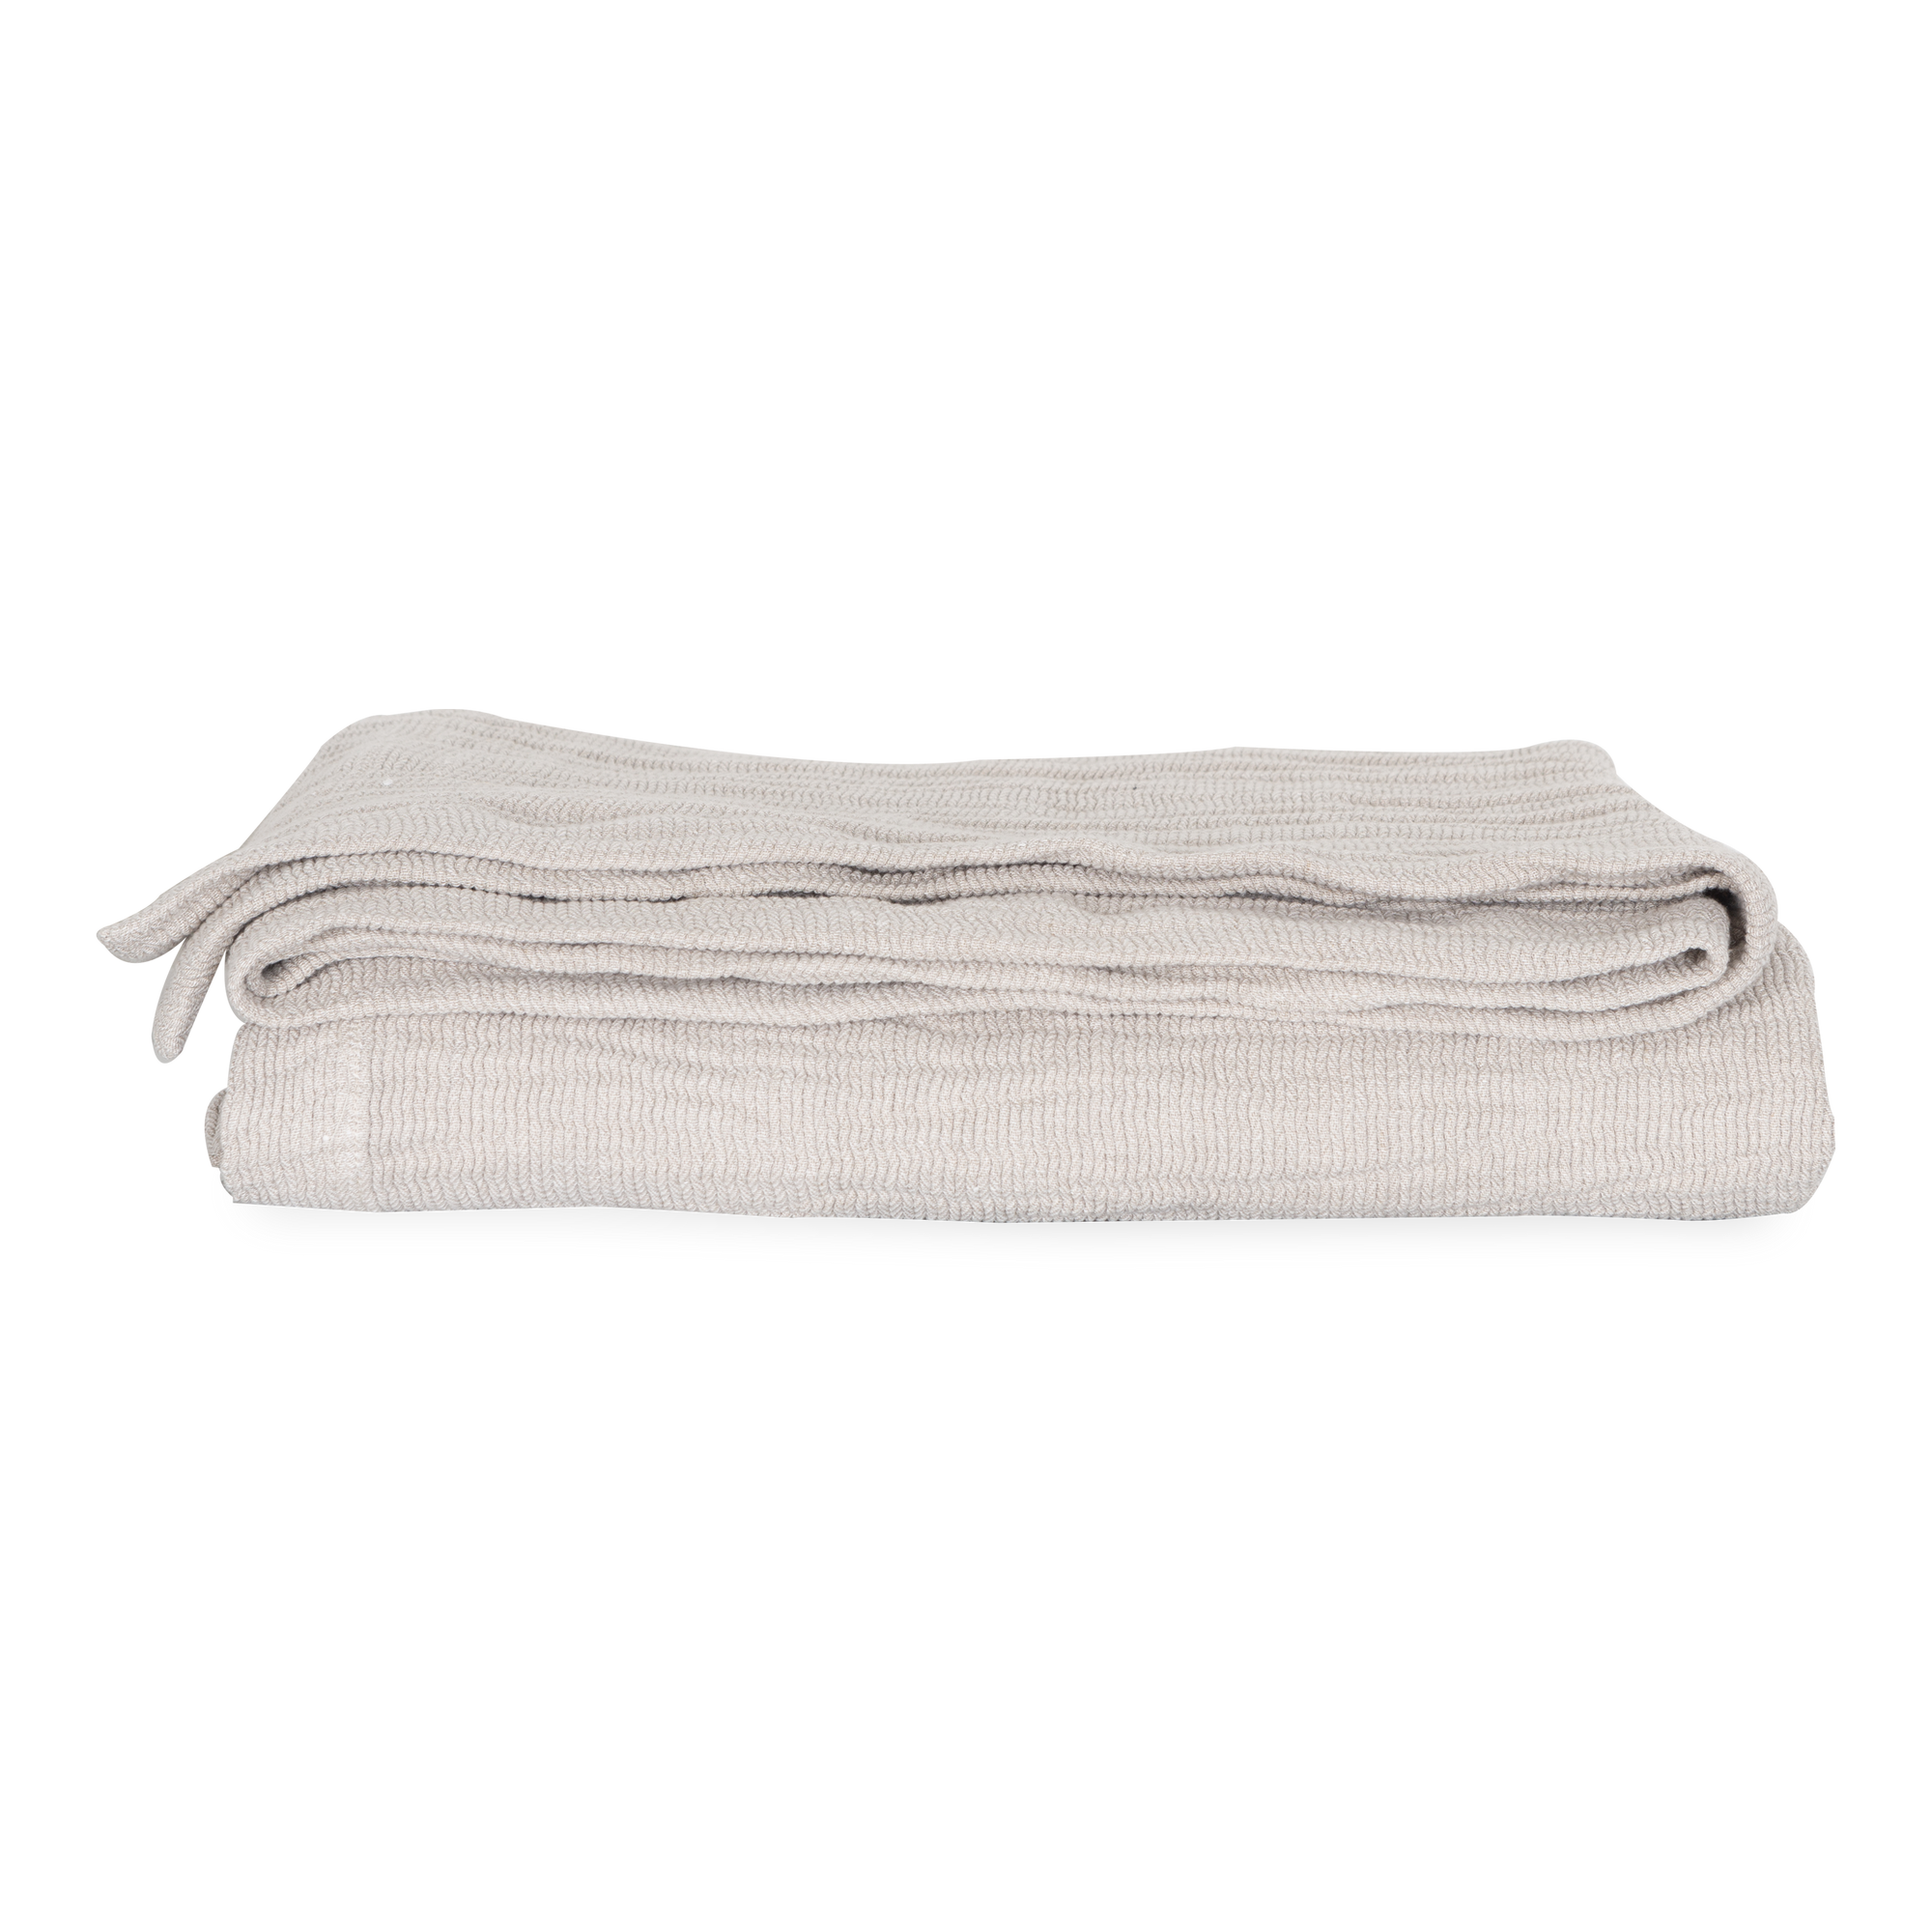 This bed cover is made with linen and features a rippled texture for an elegant drape.